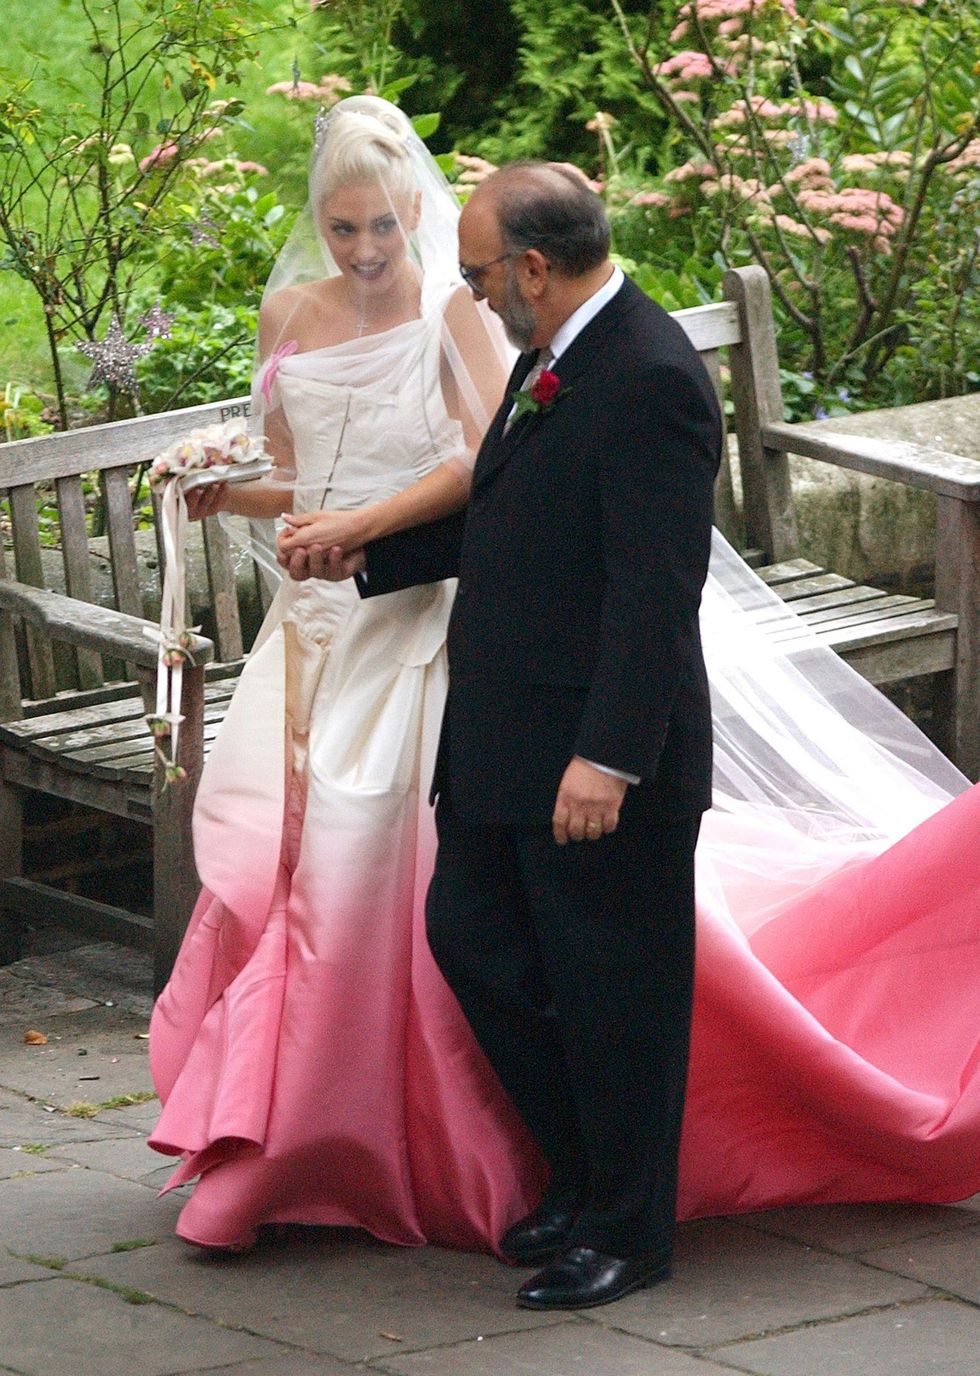 Photograph, Gown, Pink, Dress, Formal wear, Ceremony, Wedding dress, Bridal clothing, Event, Bride, 